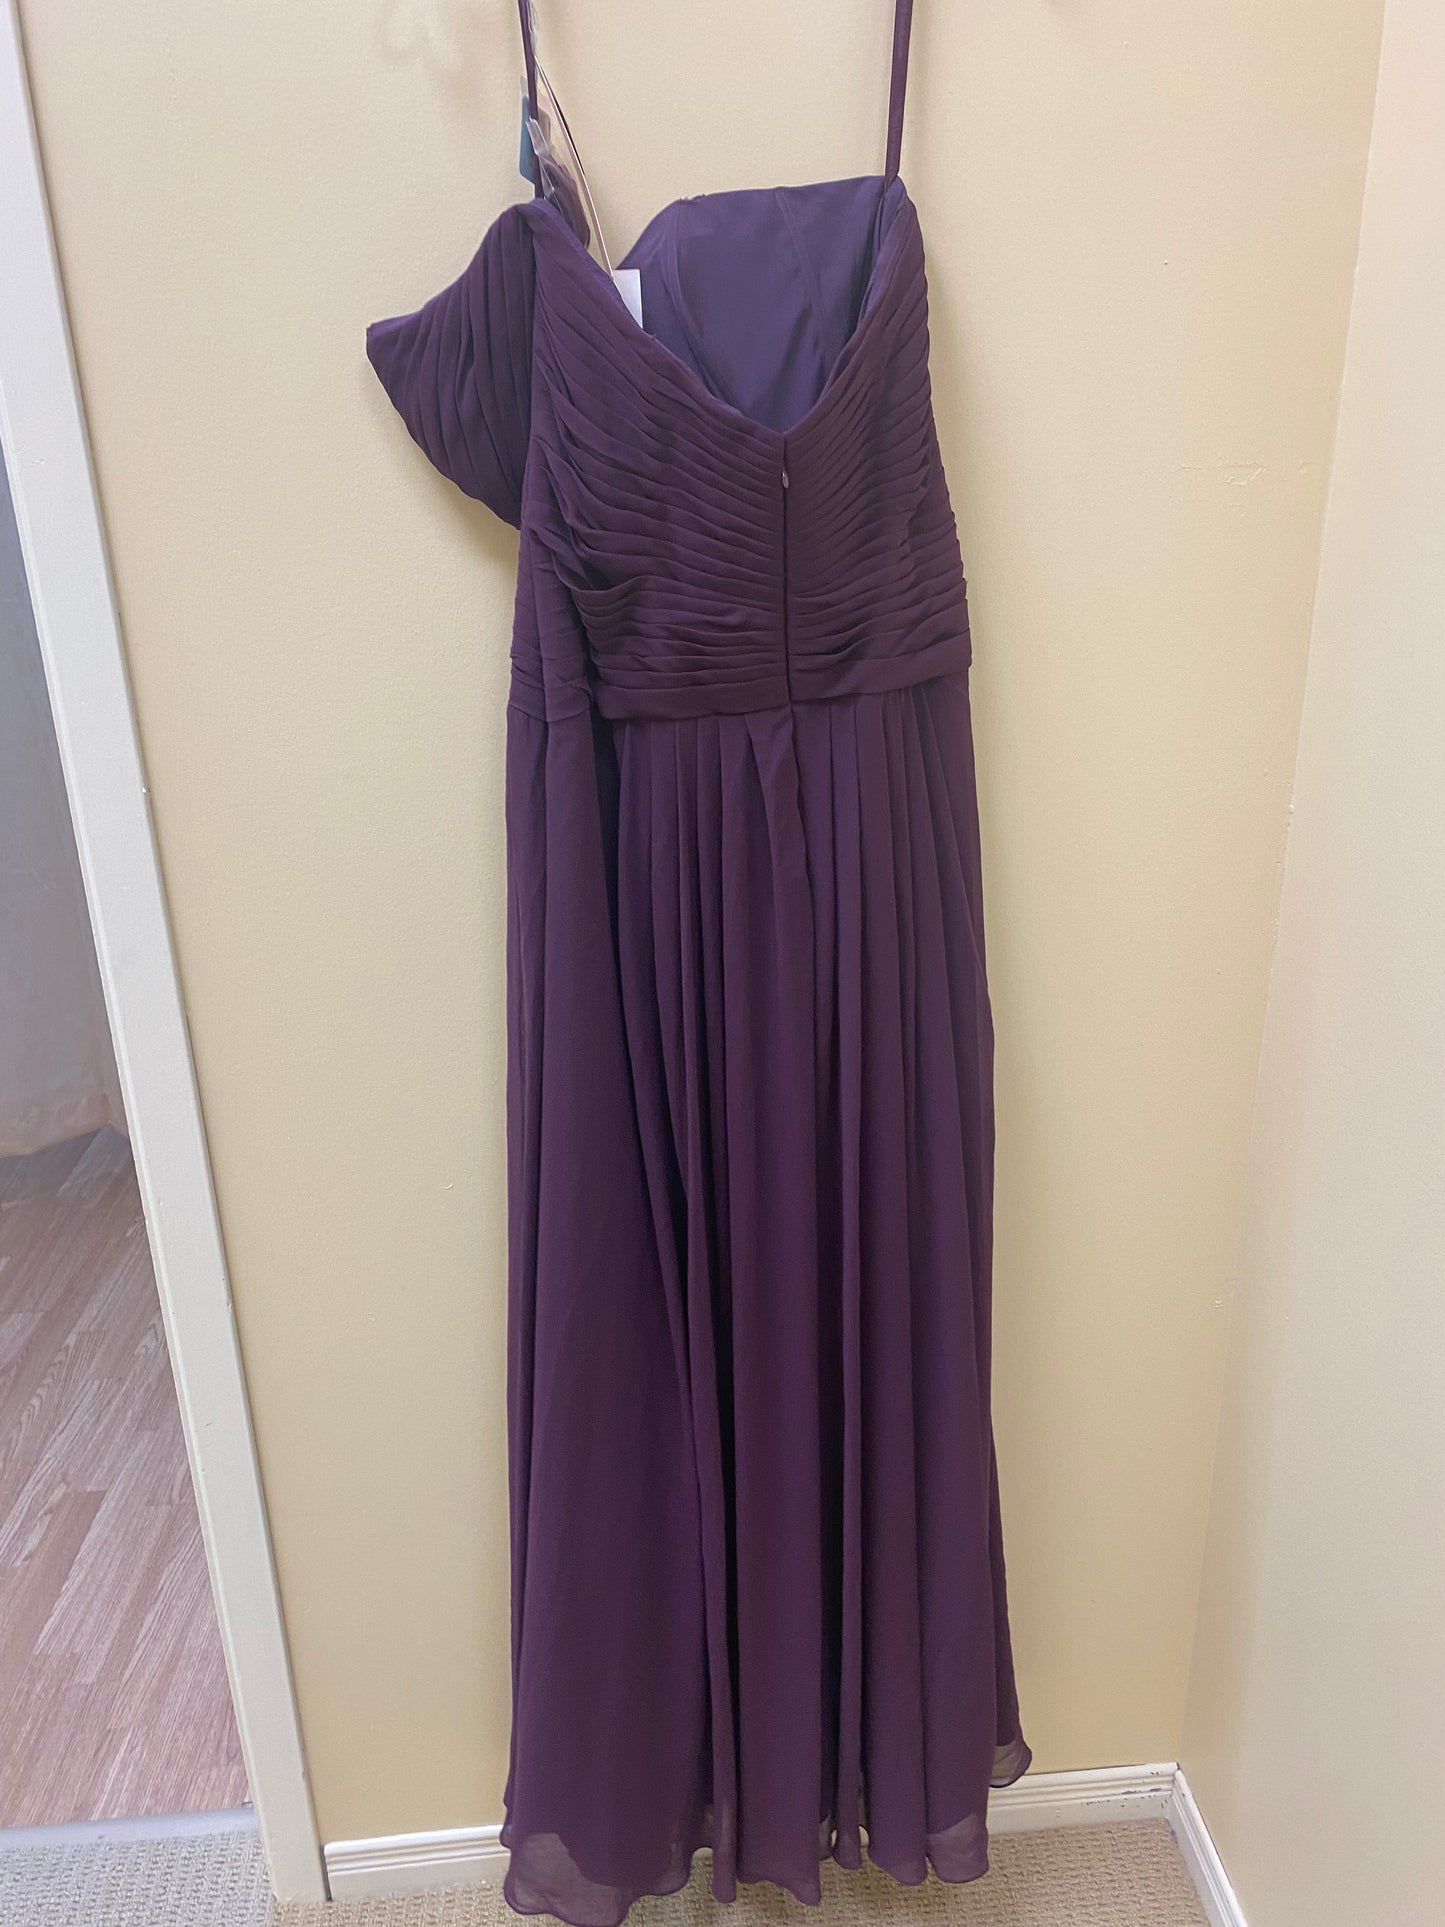 MORI LEE - 705 - Eggplant Size 16 or Cantaloupe Size 12 Long Prom / Mother of the Bride / Bridesmaid Dress